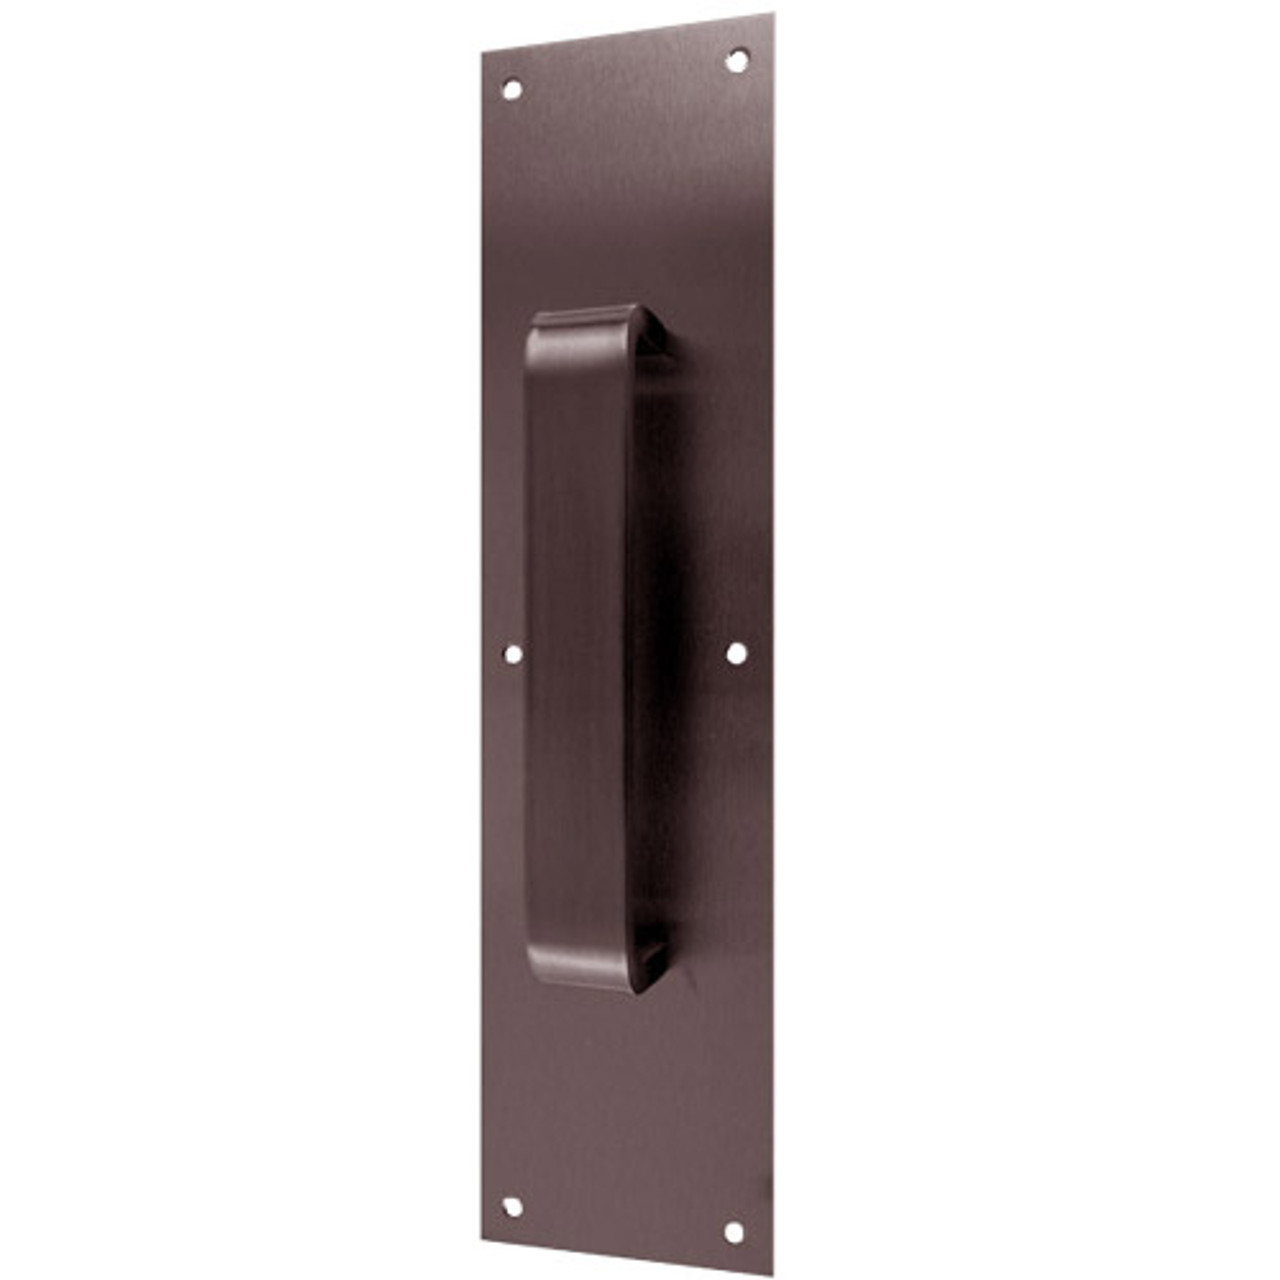 7130-613 Don Jo Pull Plates with Flat Pulls in Oil Rubbed Bronze Finish